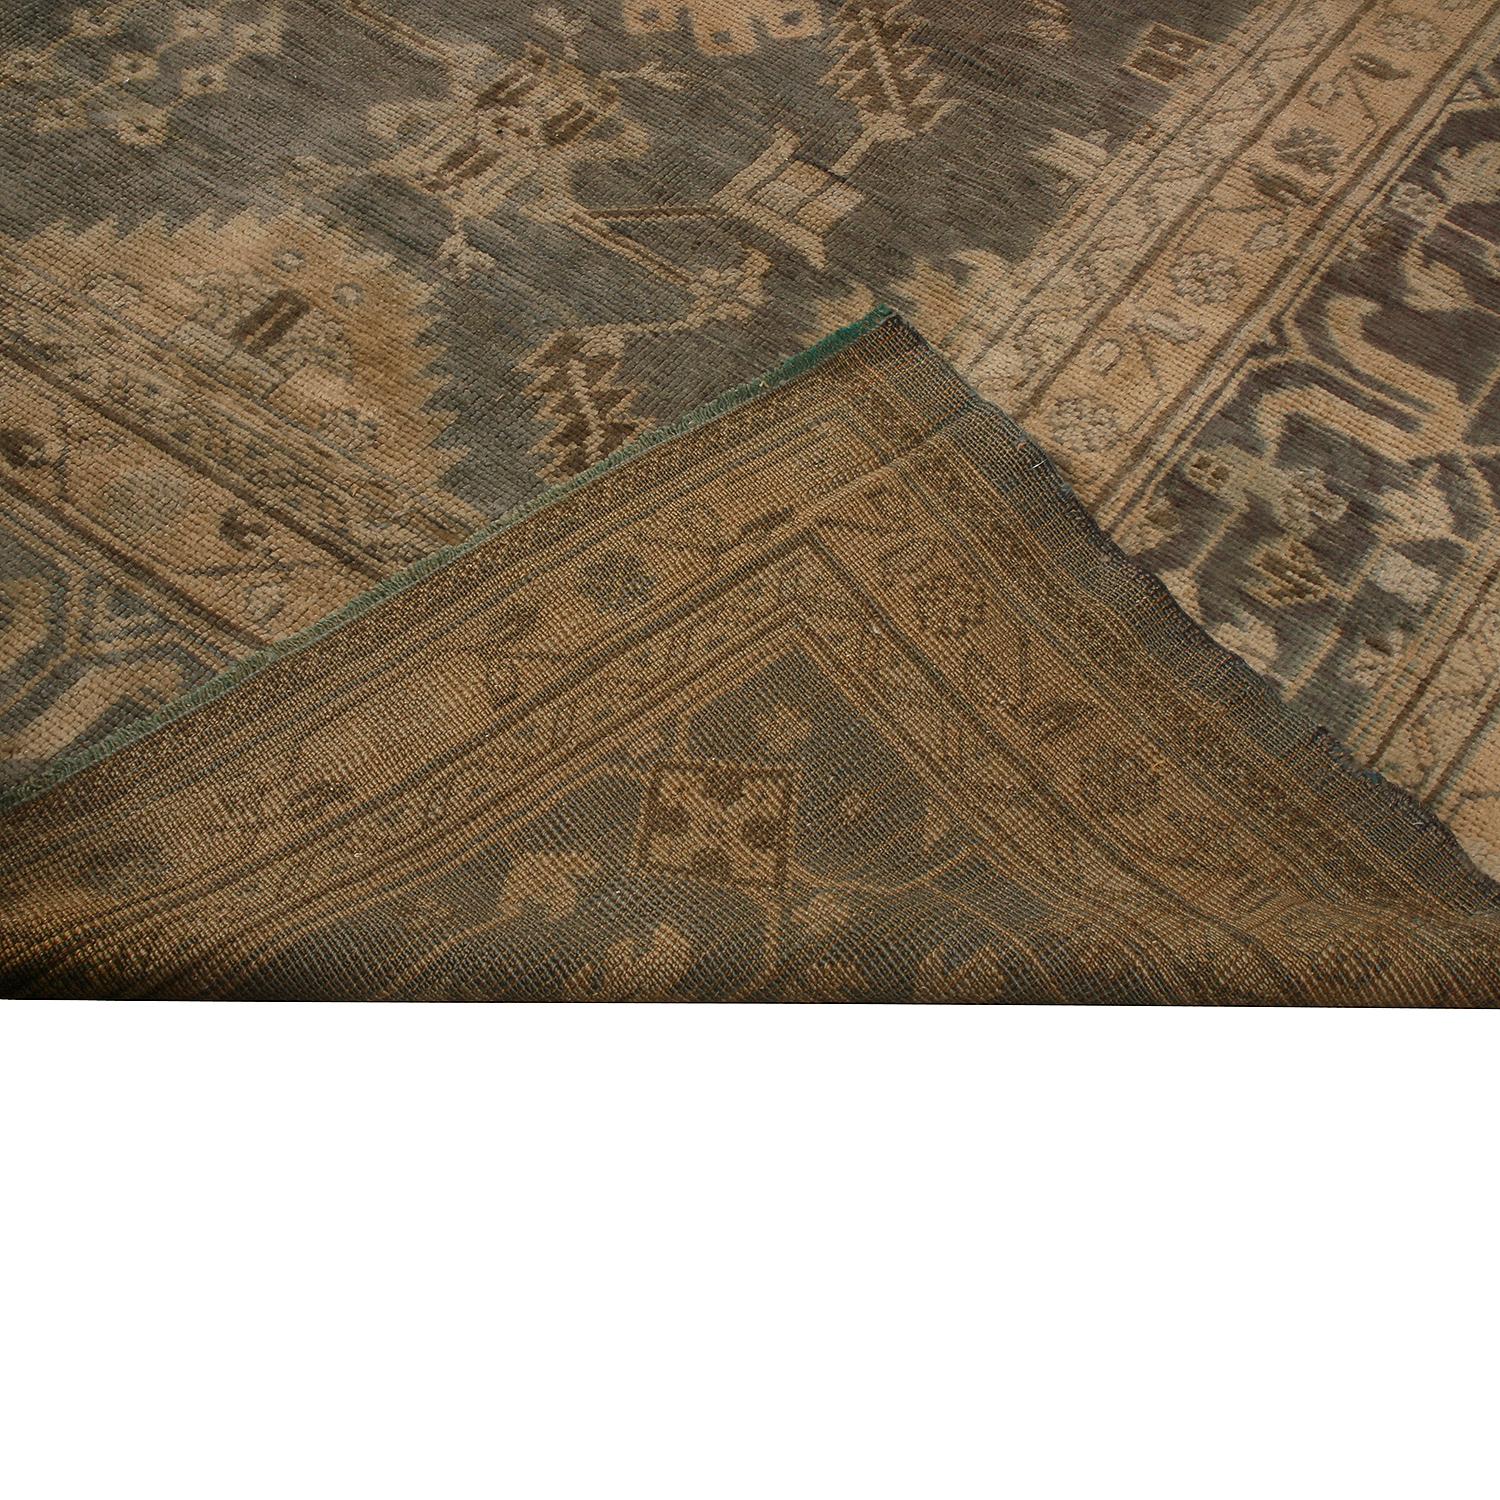 Early 20th Century Antique Oushak Rug in Slate with Beige Floral Patterns, from Rug & Kilim For Sale